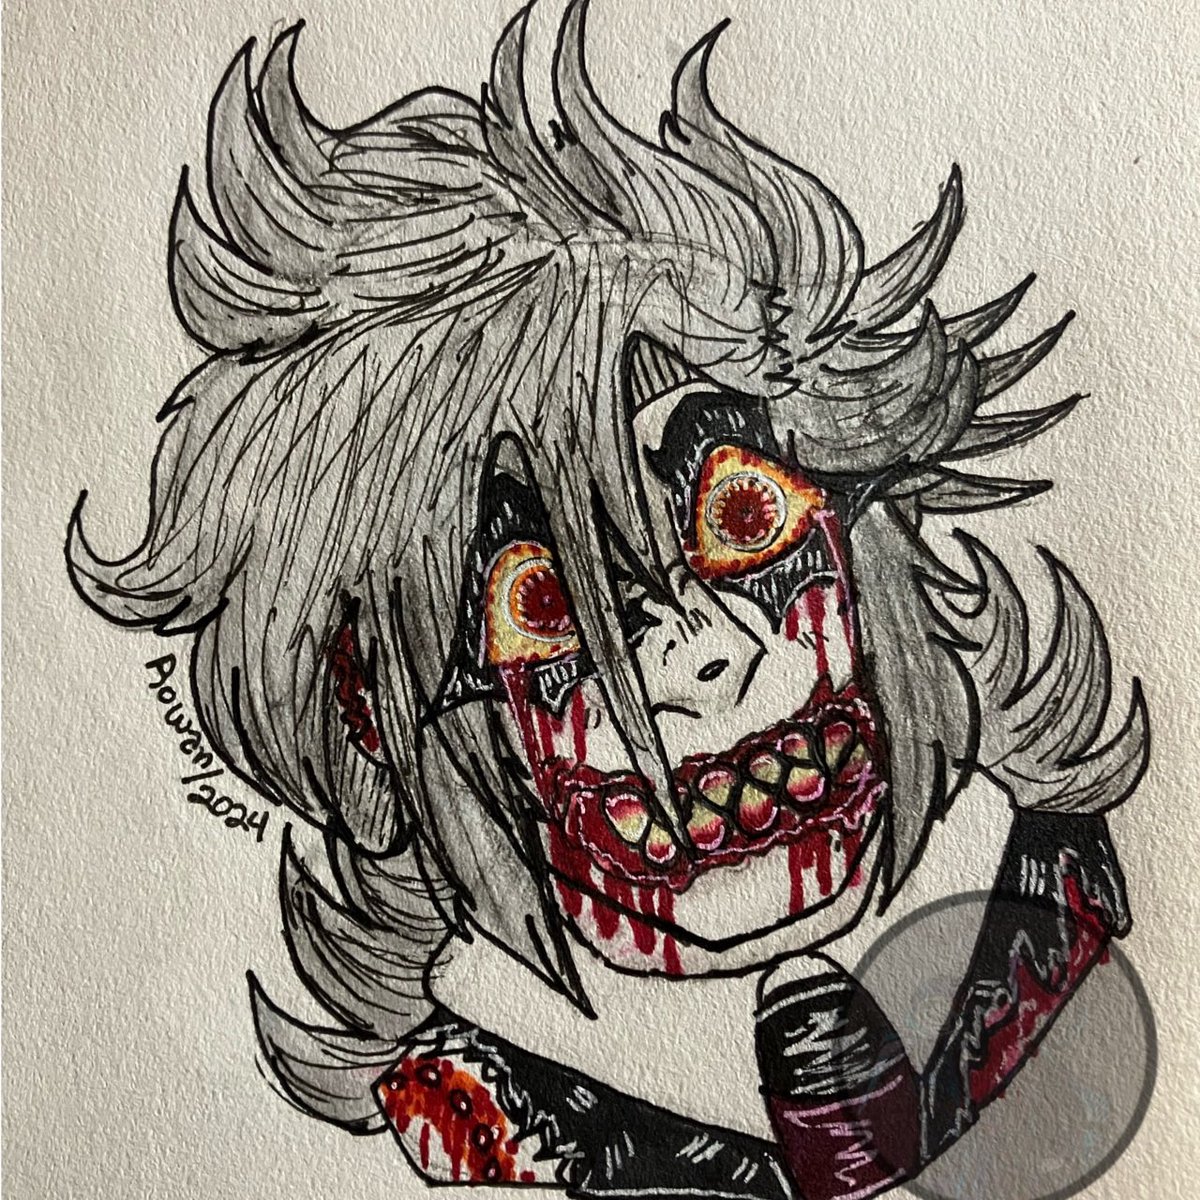 Made some art of my spider verse oc Dusty but if she was infected by the Rage Virus from 28 Days later. 

Great job Don, you just had to kiss your wife. 🙄
#SpiderVerse #spidermanoc #TwentyEightDaysLater #ragevirus #zombie #infected #traditionalart #ohuhumarkers